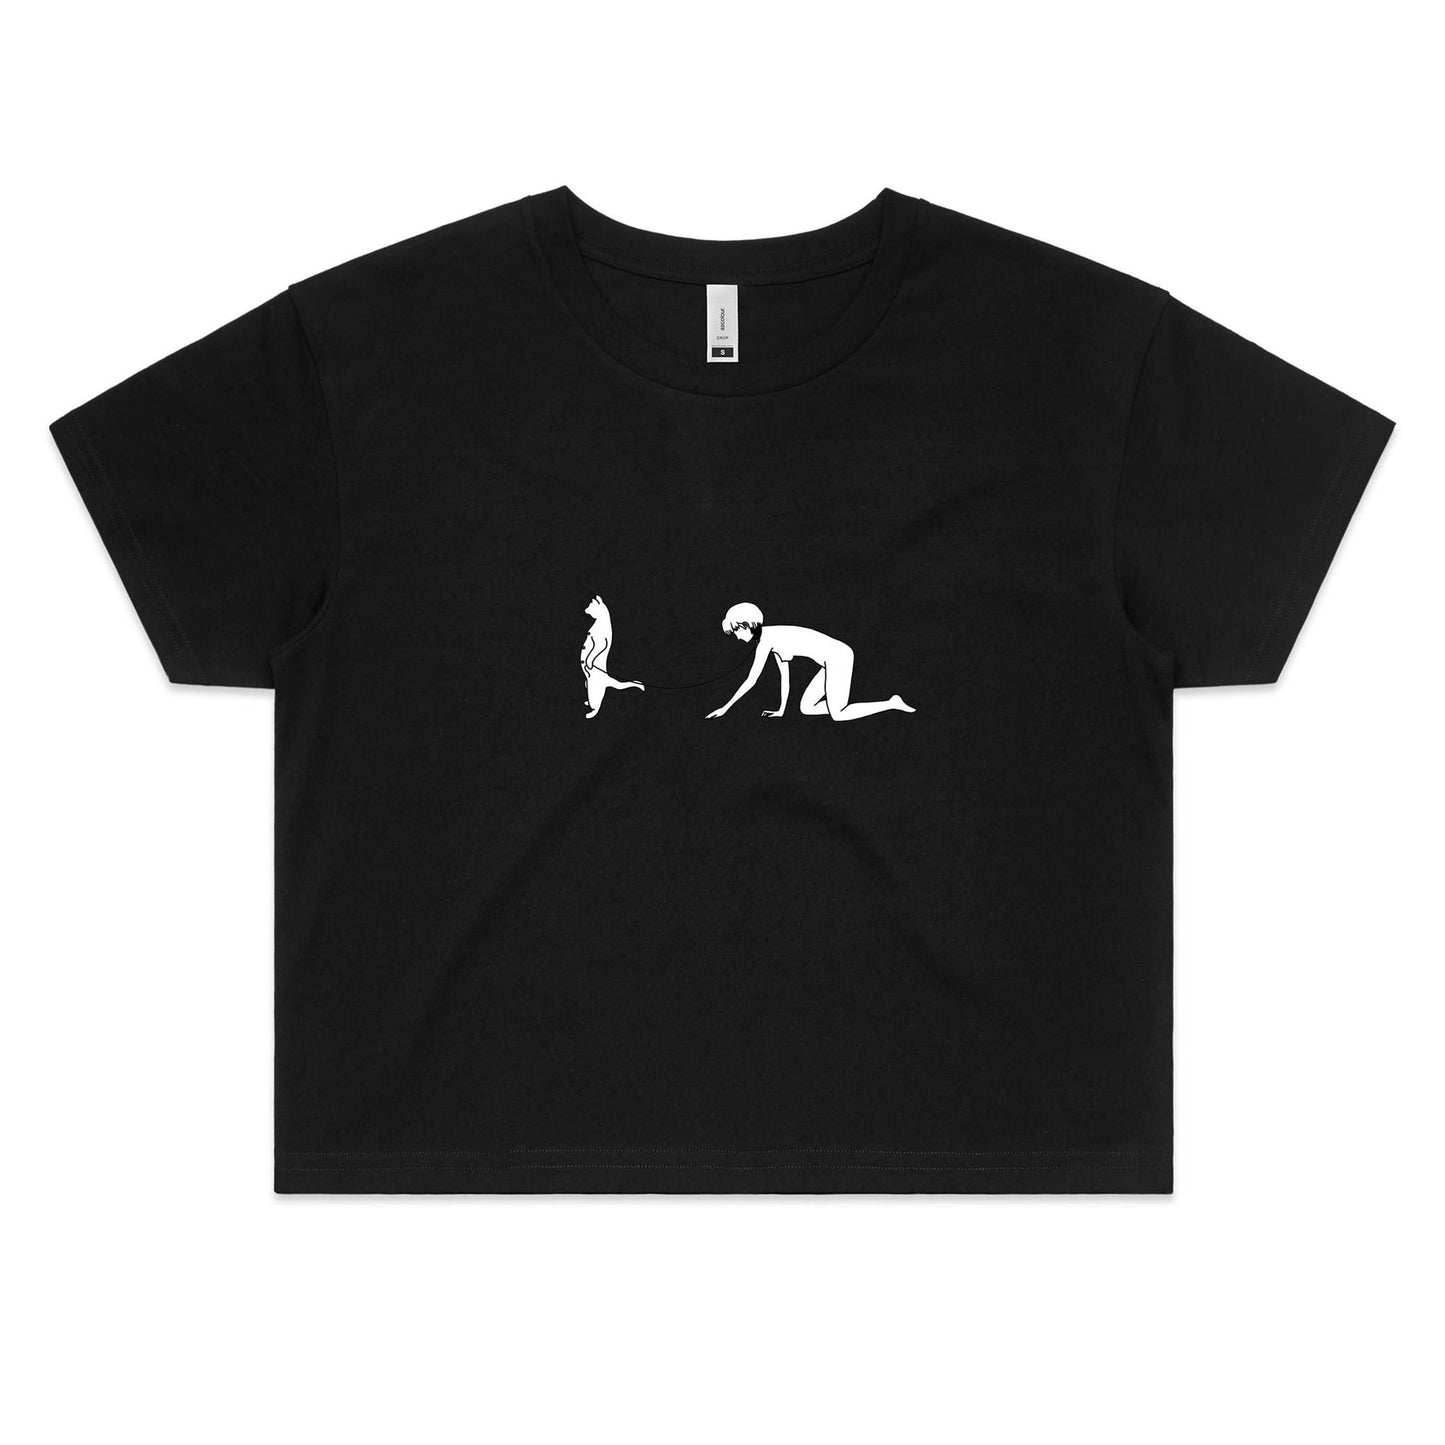 Cat Sub crop tee in black by ministry of style